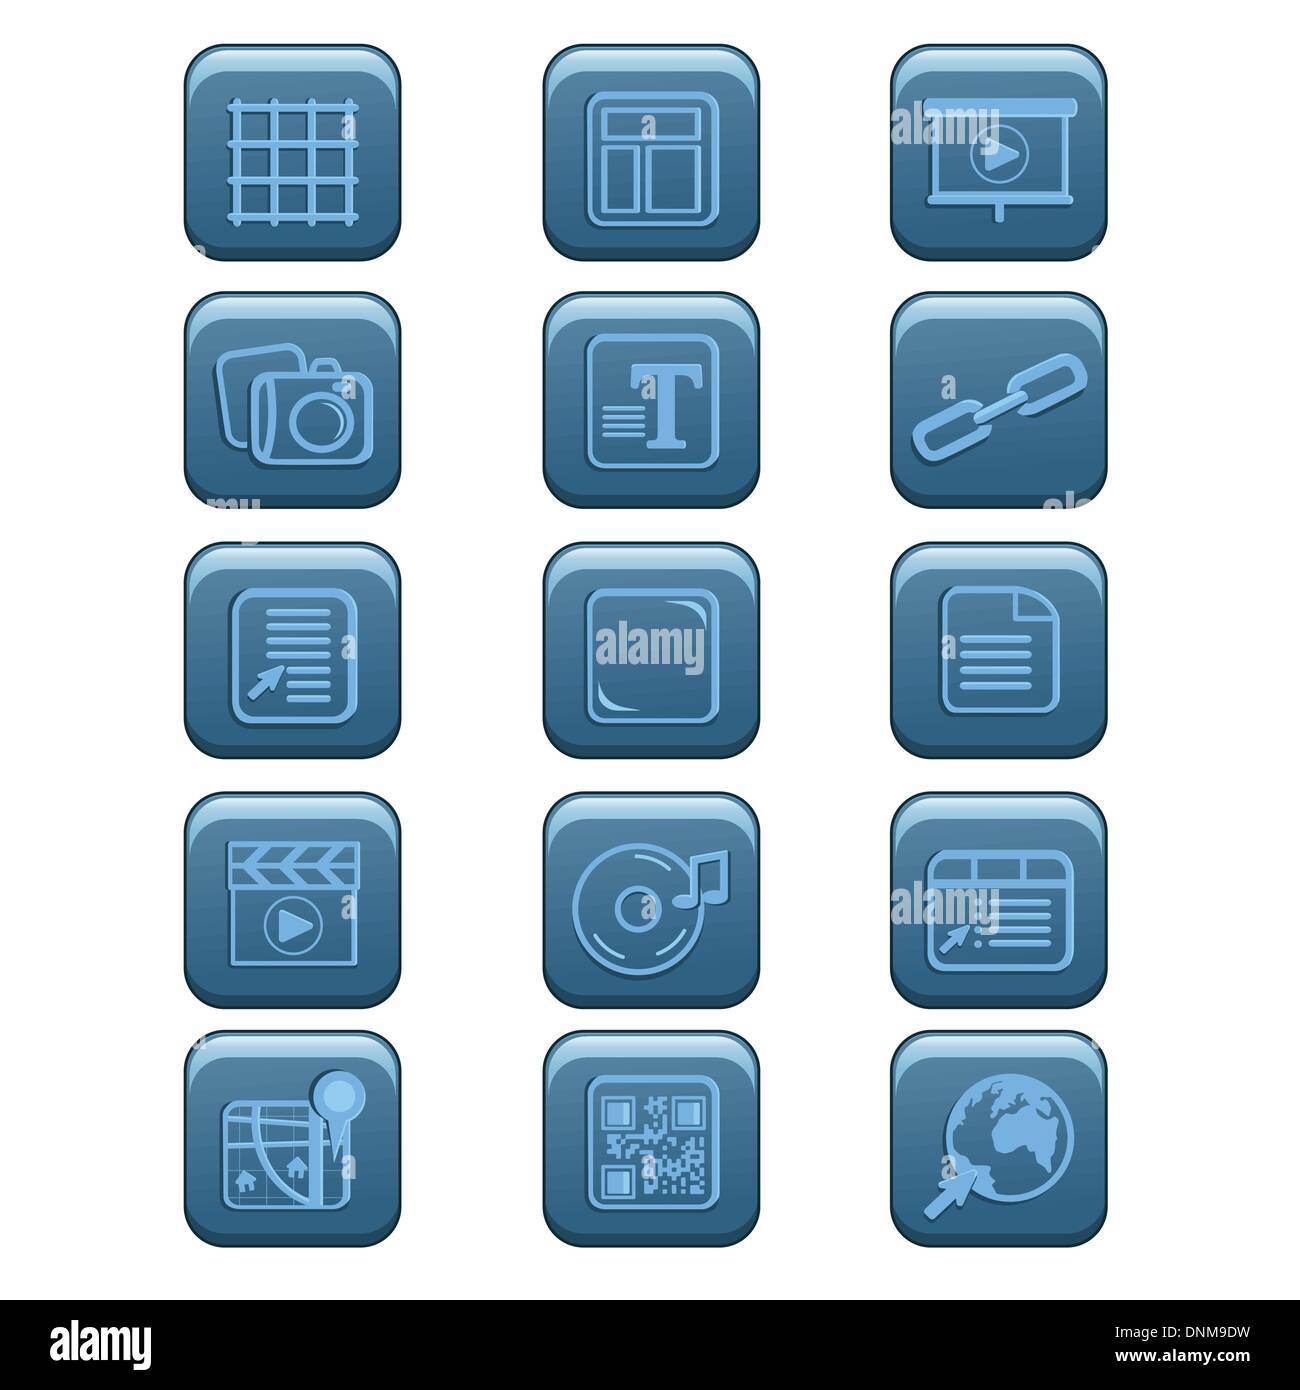 A vector illustration of website icon sets Stock Vector